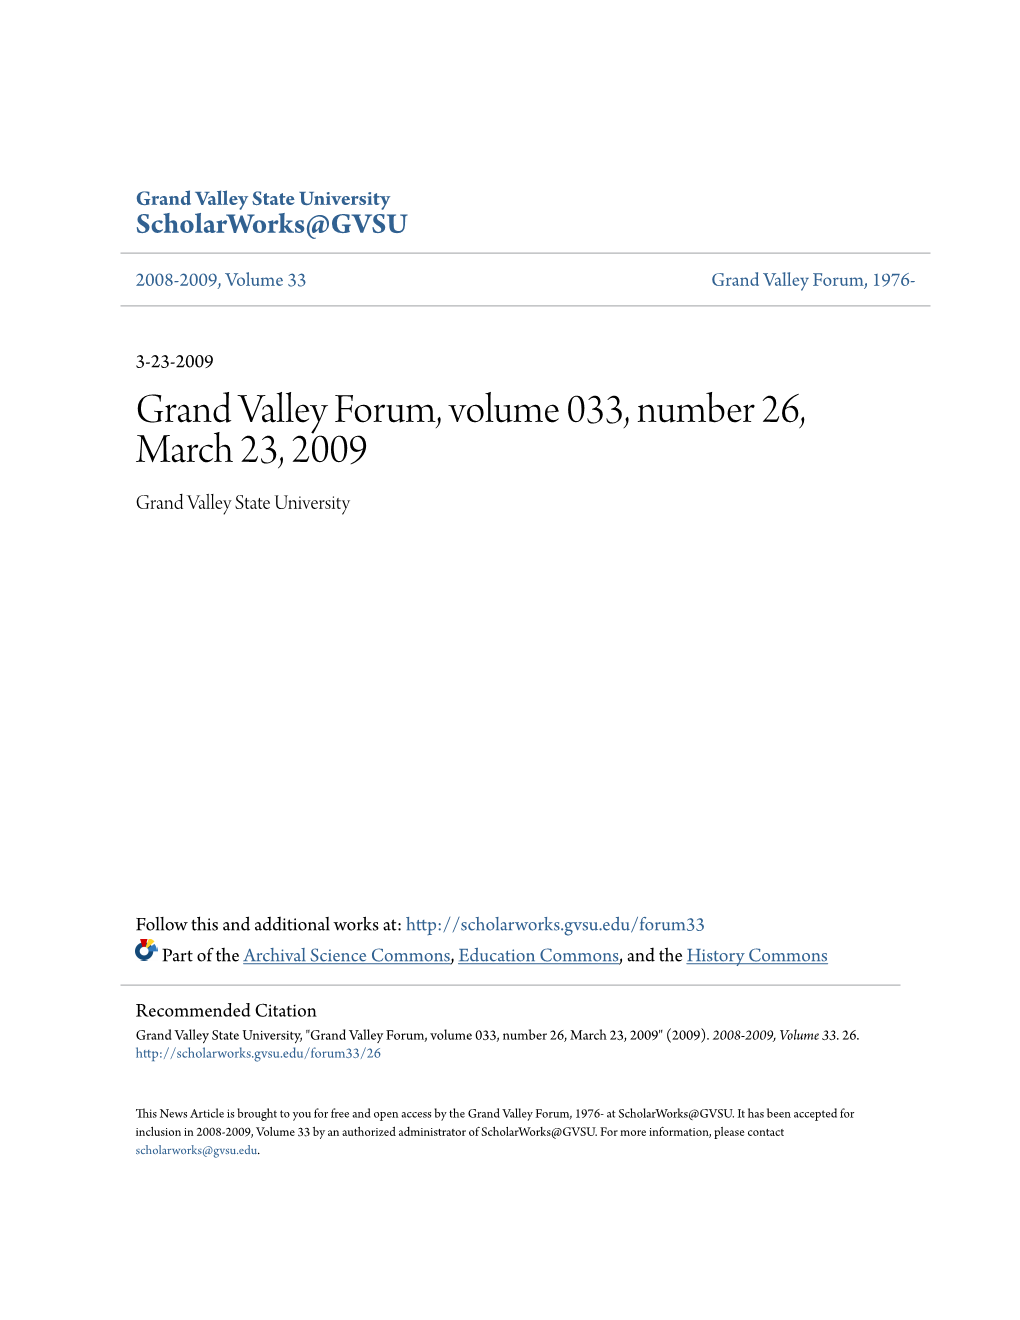 Grand Valley Forum, Volume 033, Number 26, March 23, 2009 Grand Valley State University